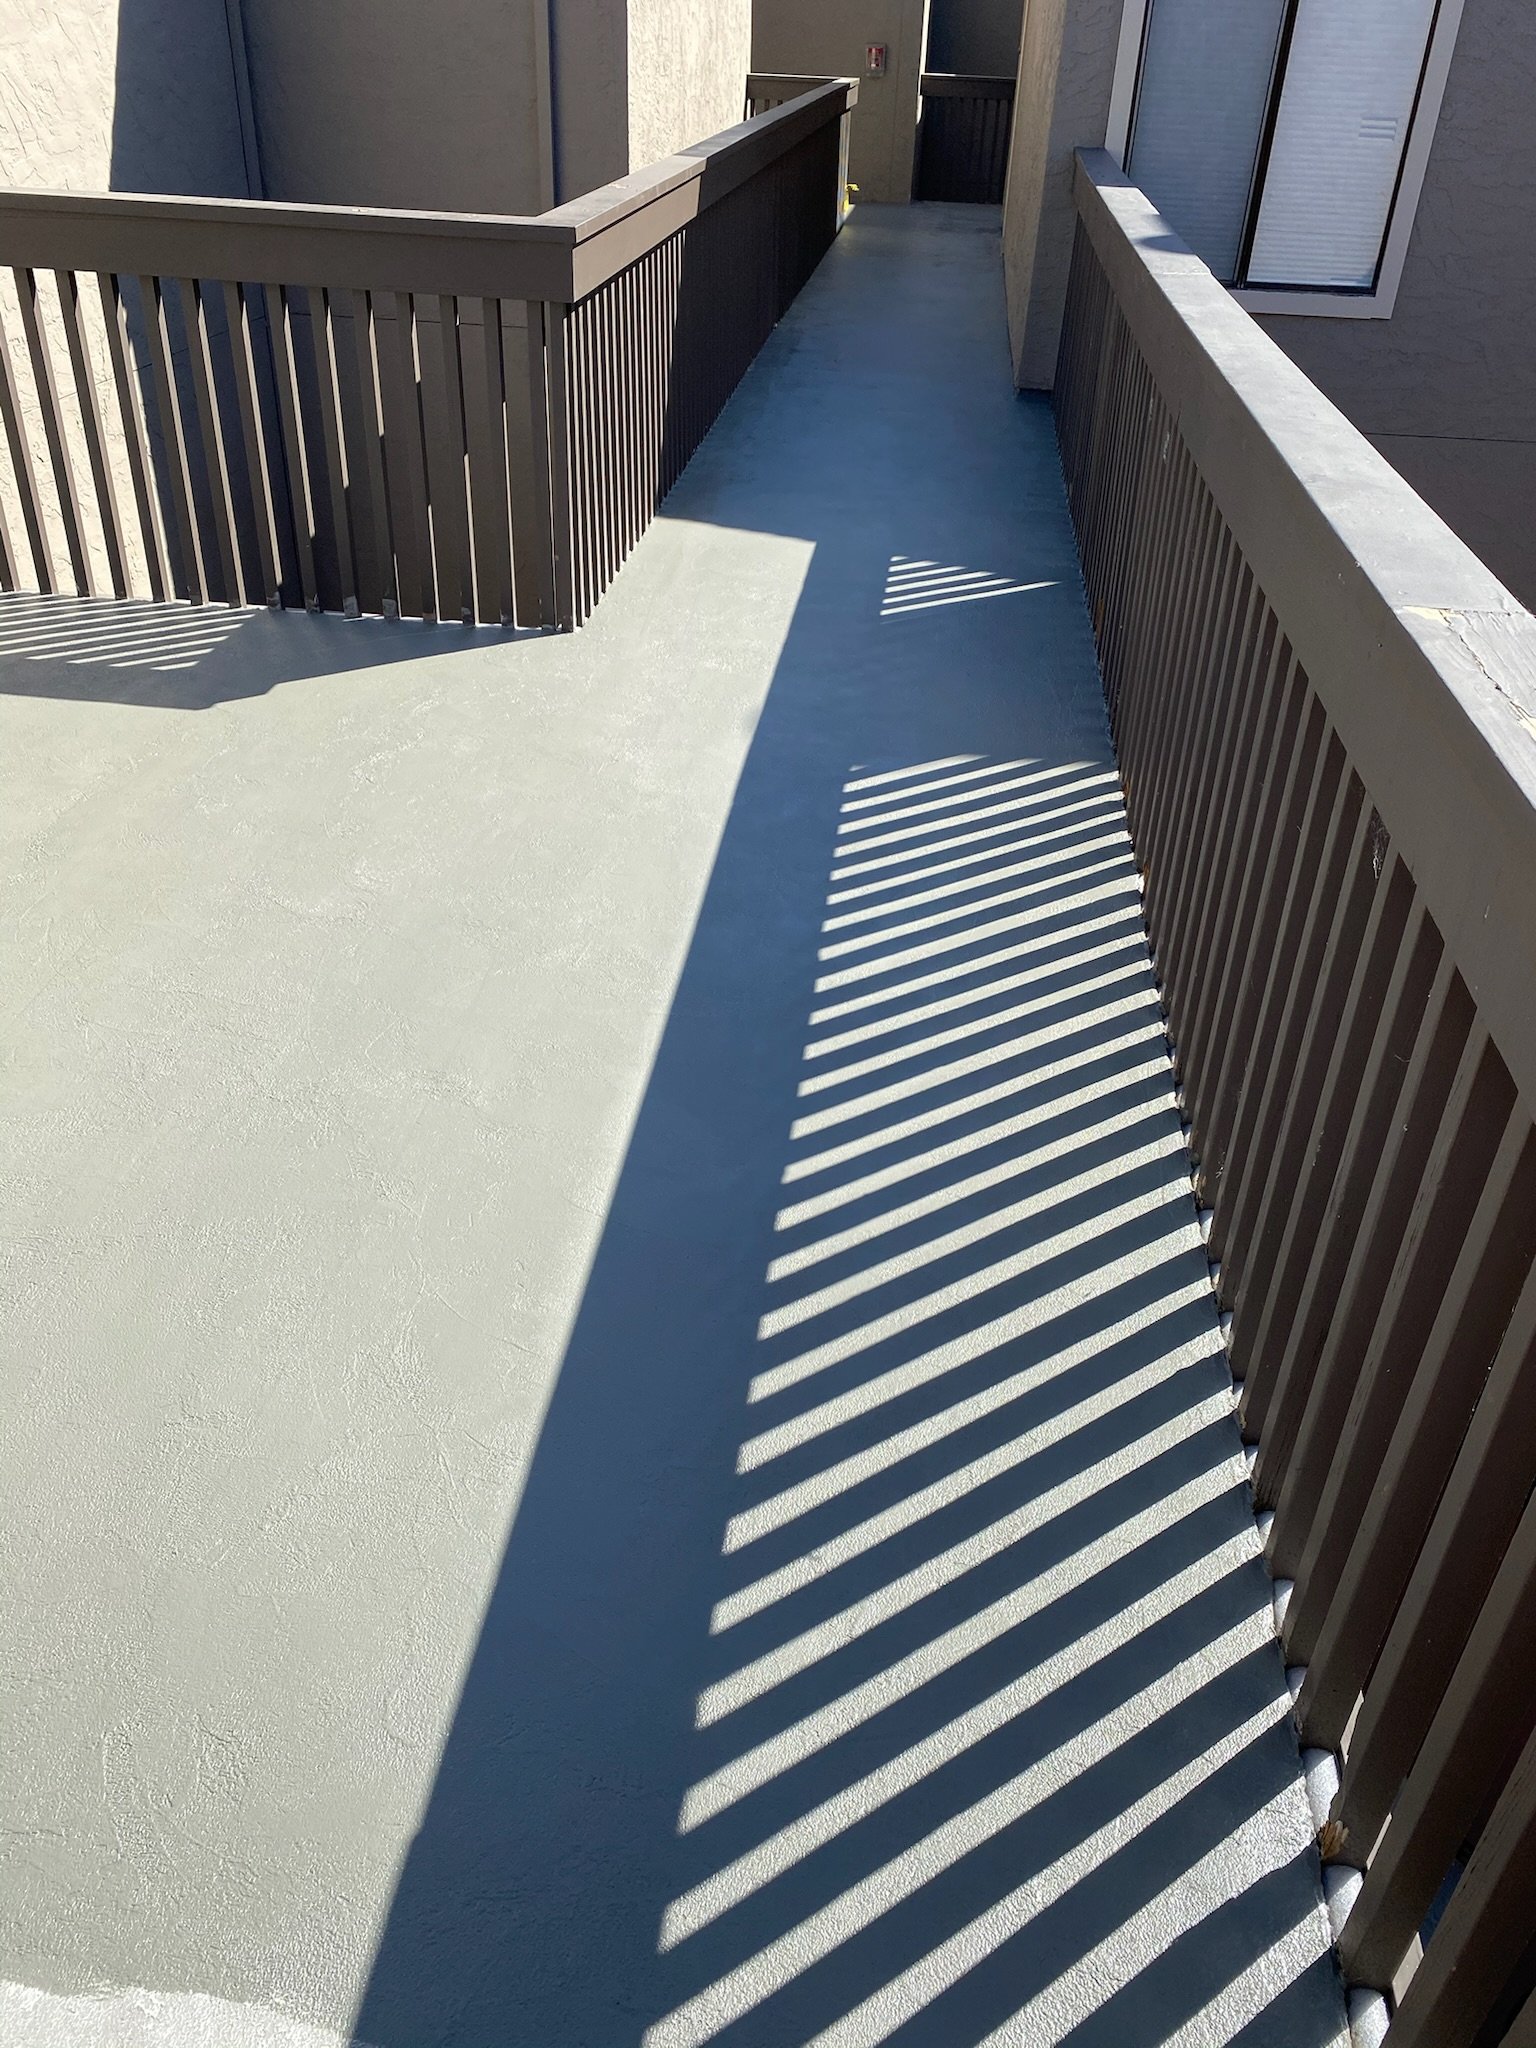 Excellent Coating Fire Rated Finish Product in Gunmetal - San Carlos, CA